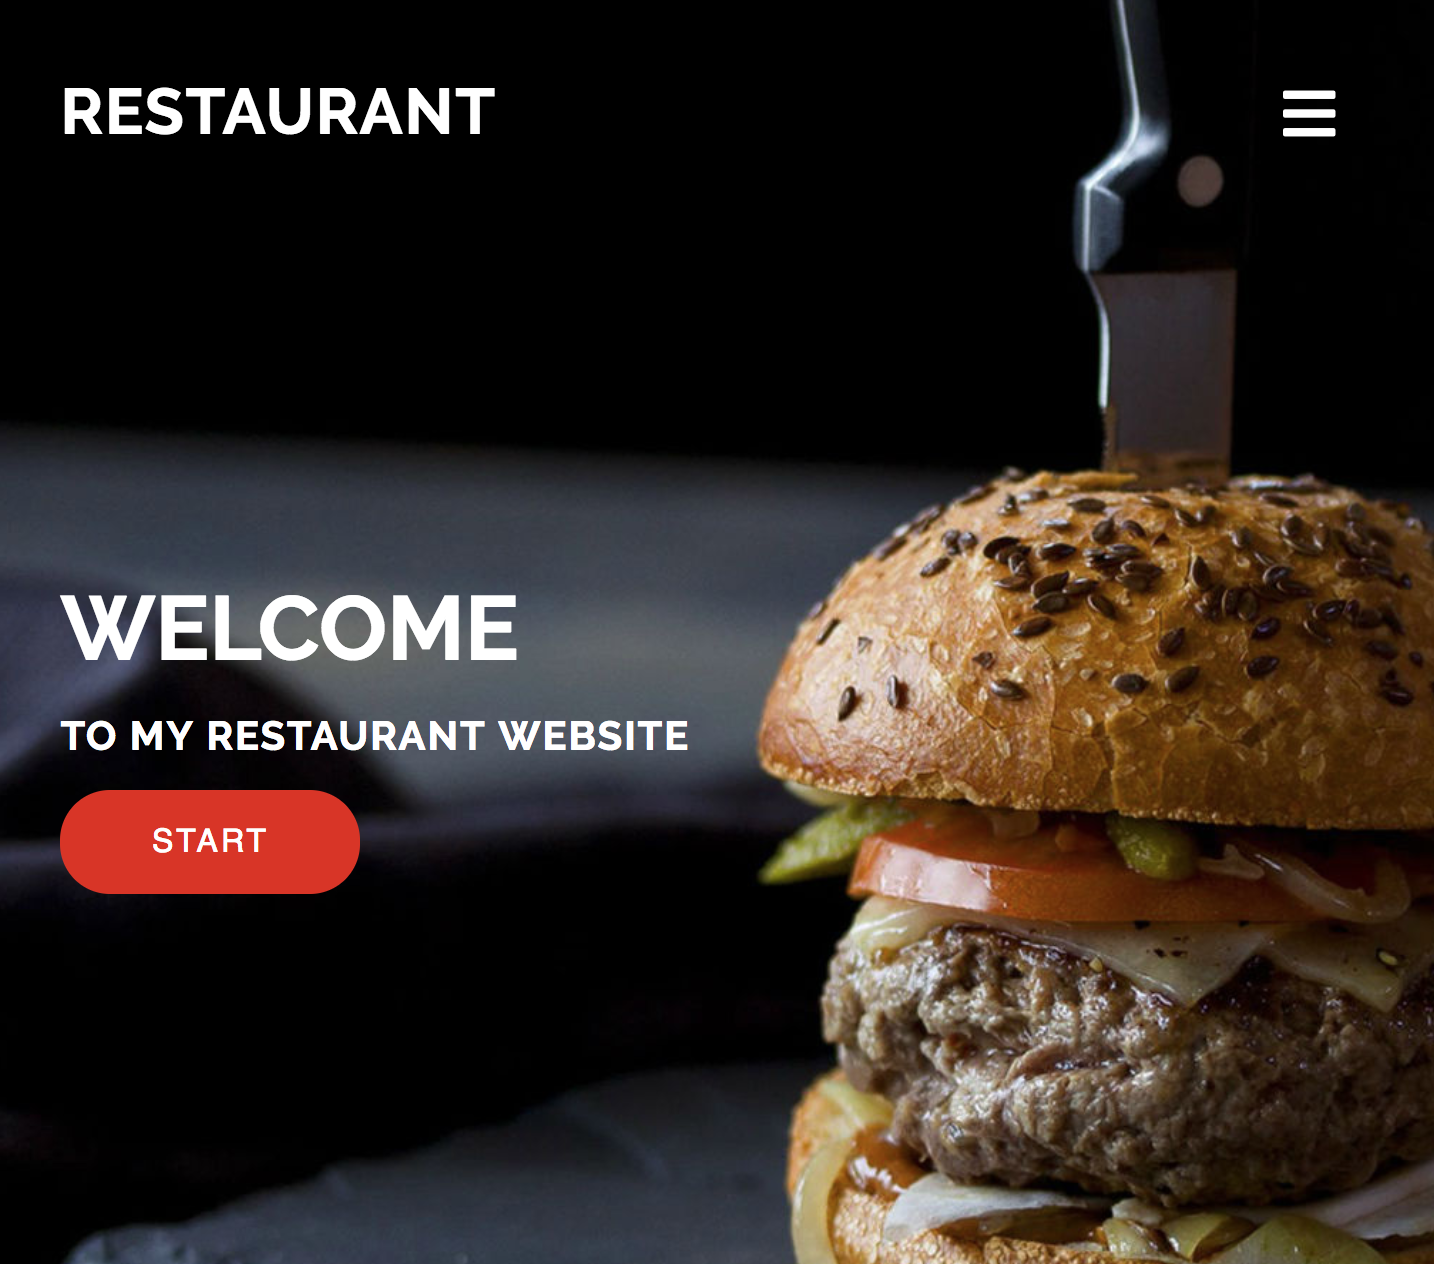 screenshot of website home page, with an image of a hamburger